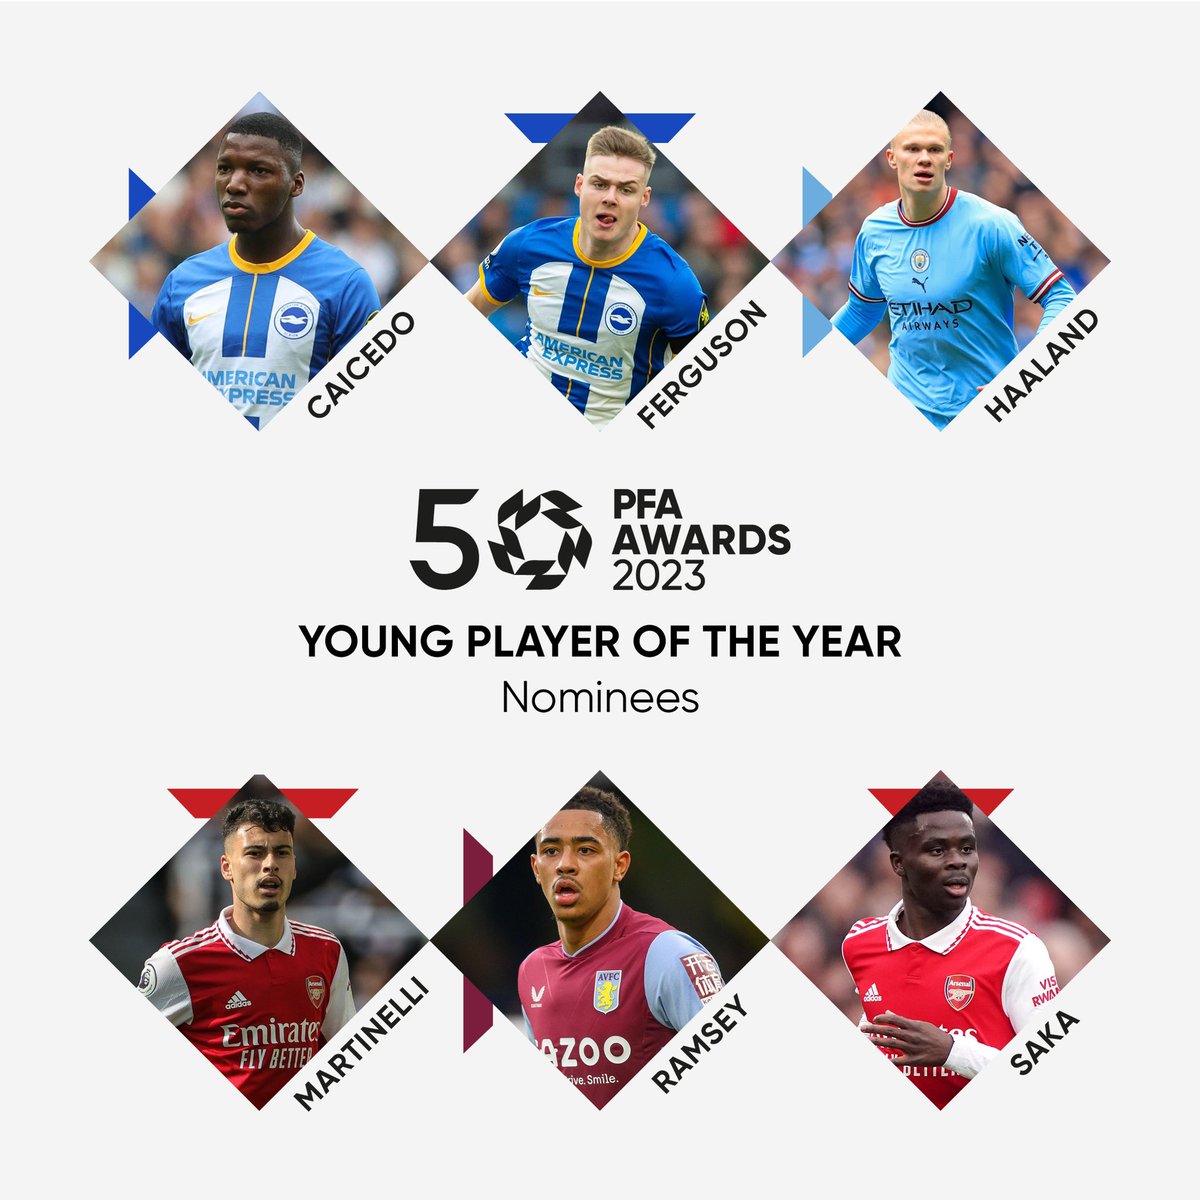 This is wonderful, our own Evan Ferguson has been nominated for the PFA Young Player of the Year. He is by some distance the youngest player on the list, by over two years! ☘️ #greenshoots